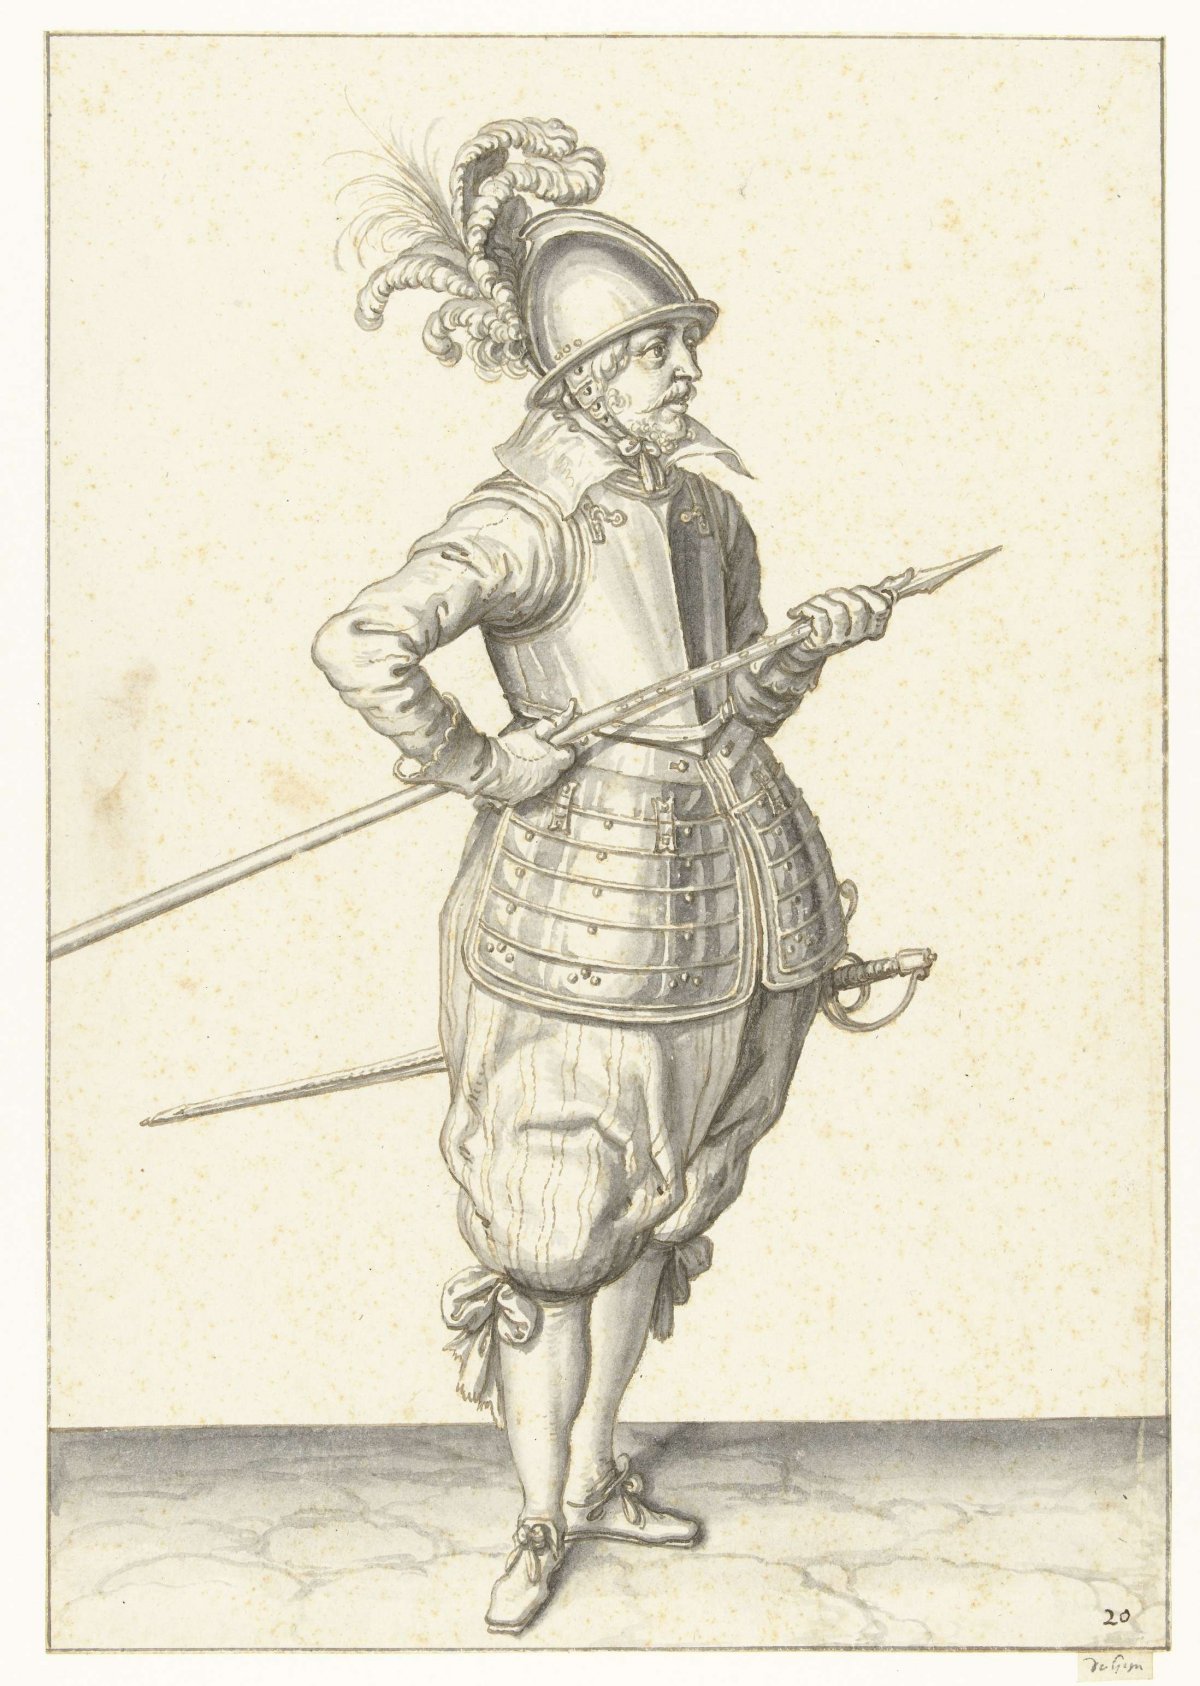 Soldier carrying his spear with both hands by his right side, the tip angled upward and near his abdomen, Jacques de Gheyn (II), 1596 - 1606